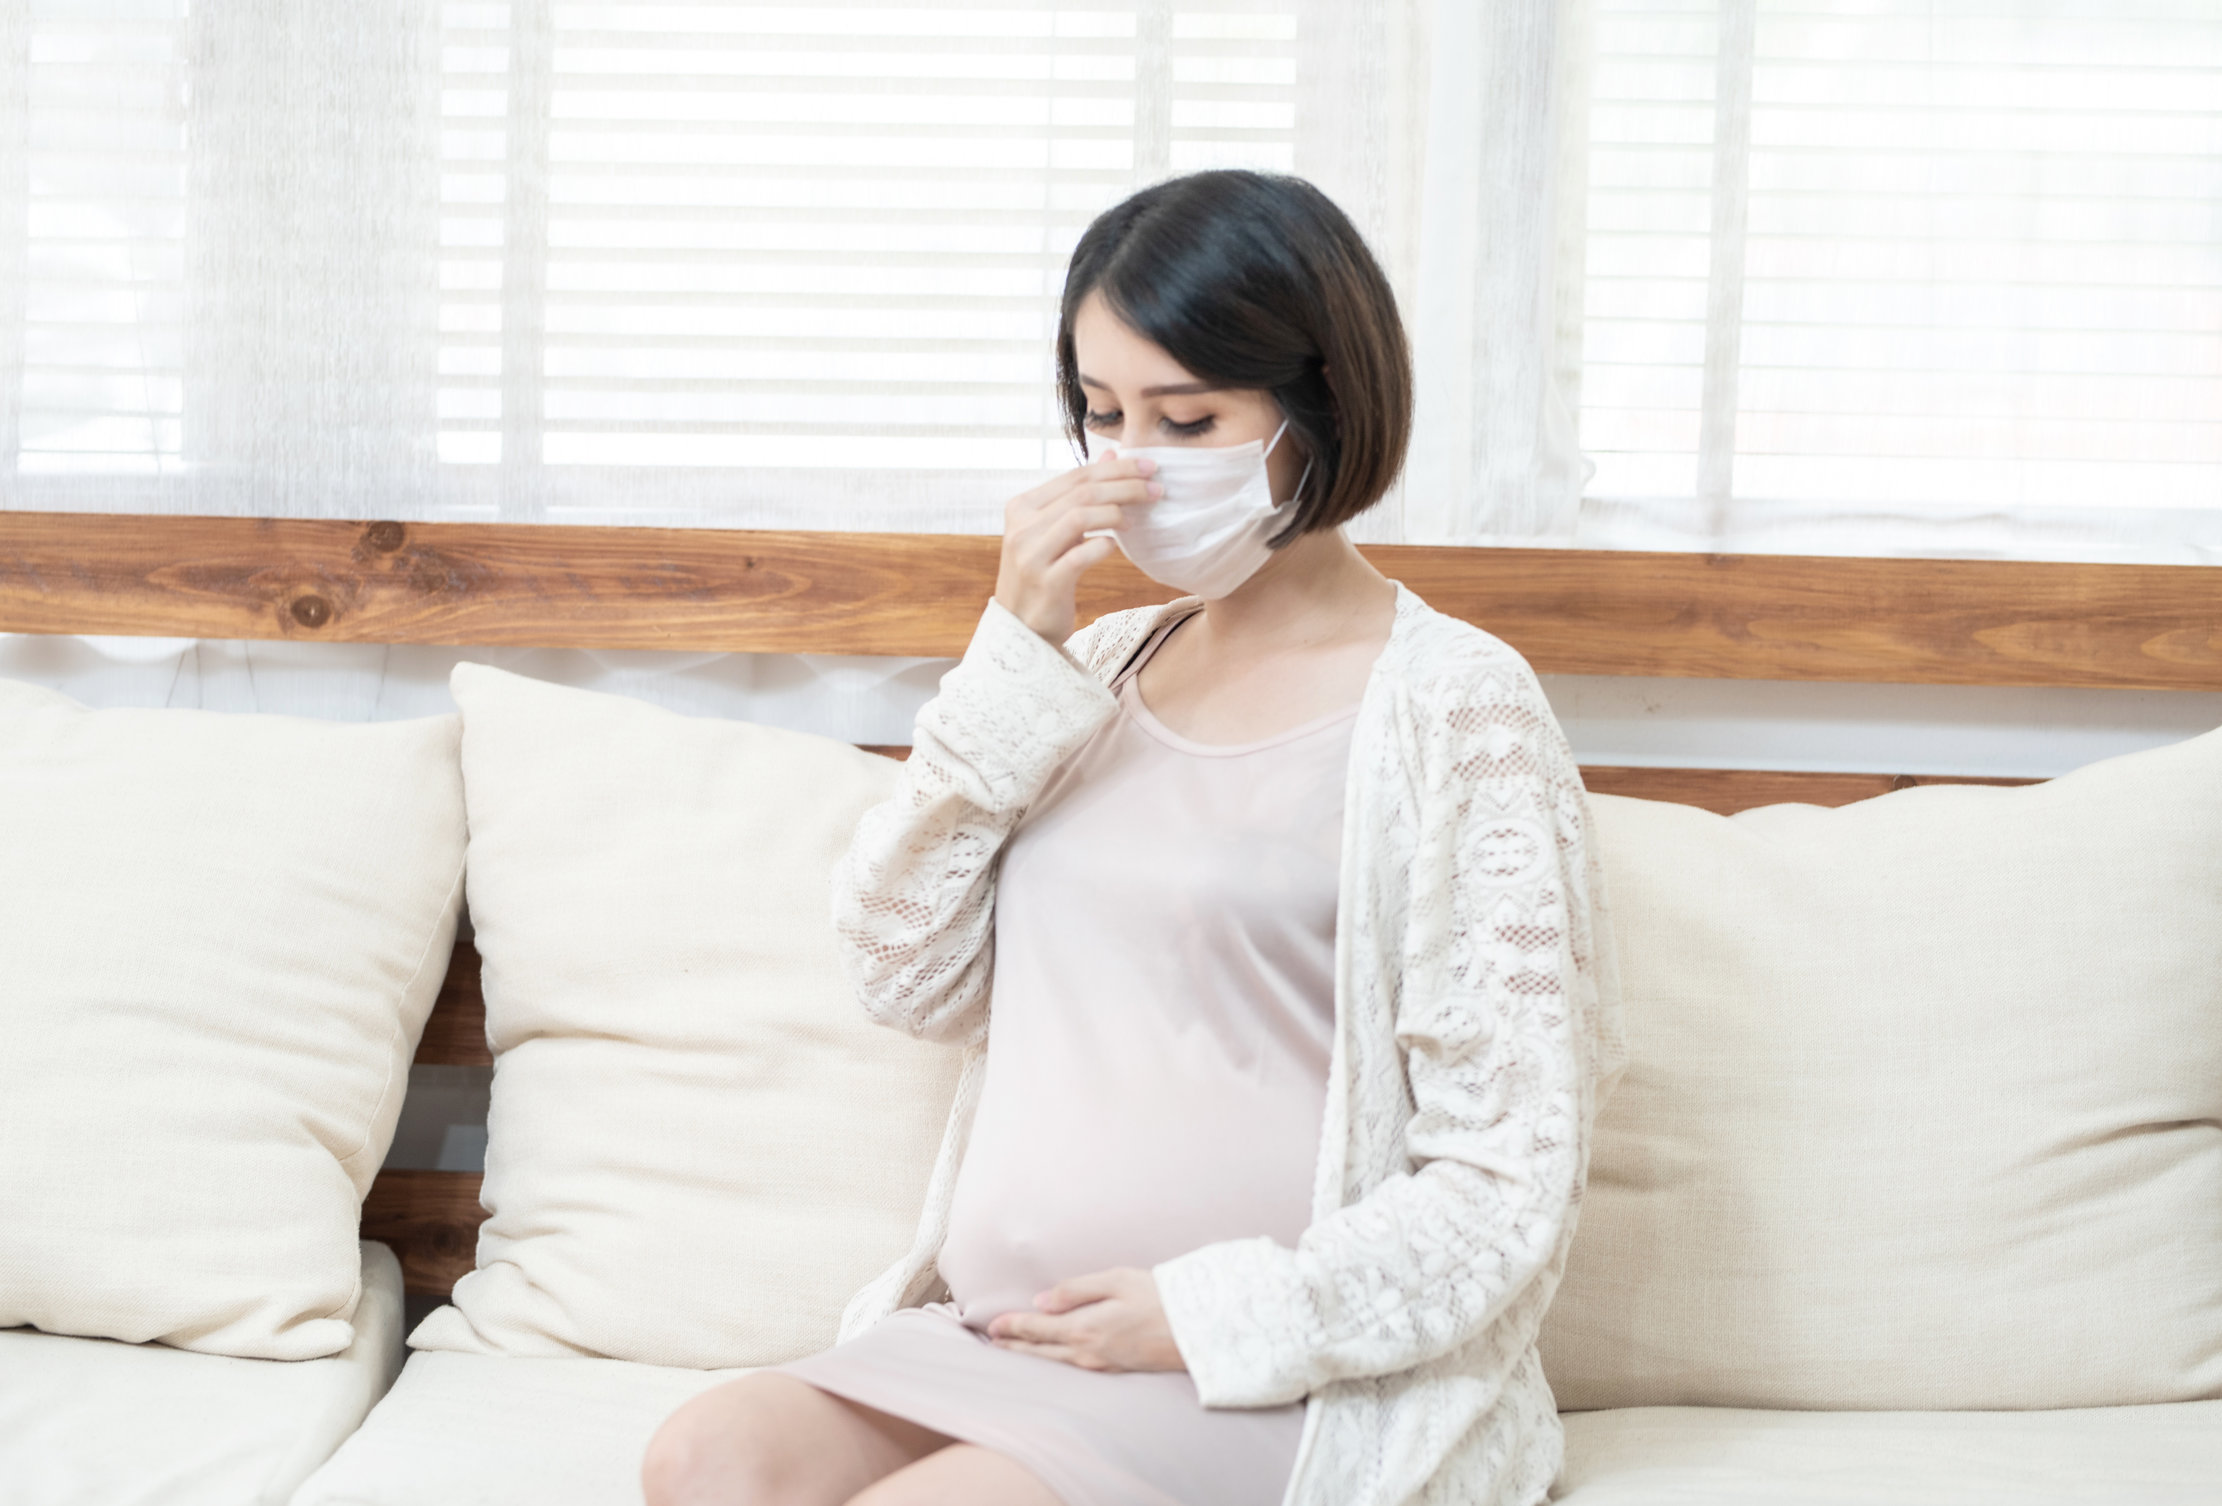 Asian pregnant women wearing surgical medical mask due to illness, dizziness ,pandemic Wuhan coronavirus (COVID-19) health care concept.